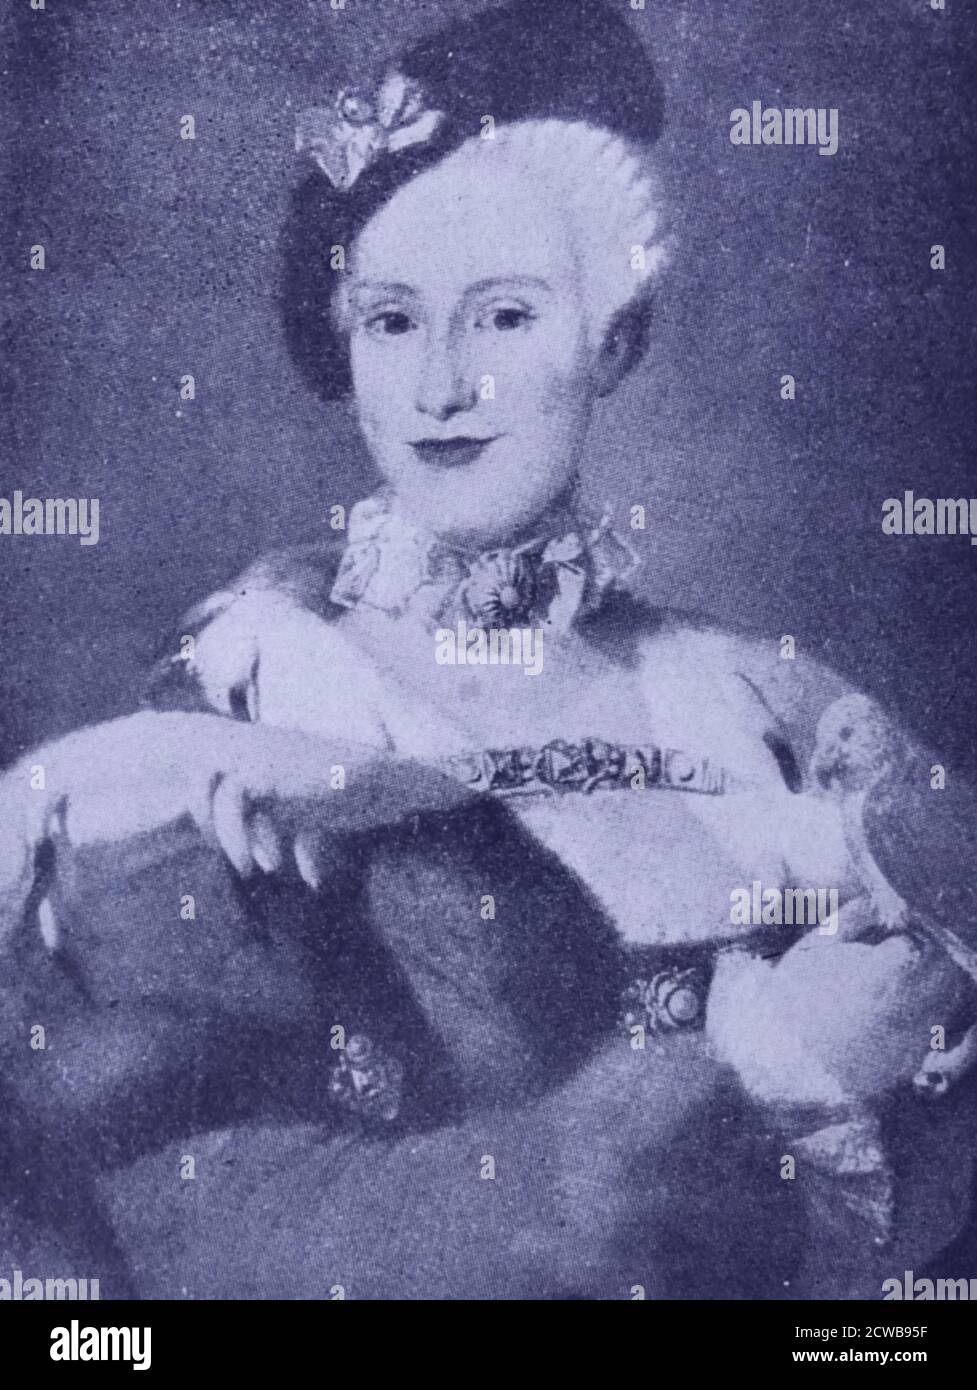 Infanta Maria Luisa of Spain (1745 - 1792), Holy Roman Empress, German Queen, Queen of Hungary and Bohemia, Grand Duchess of Tuscany as the spouse of Leopold II, Holy Roman Emperor. Stock Photo